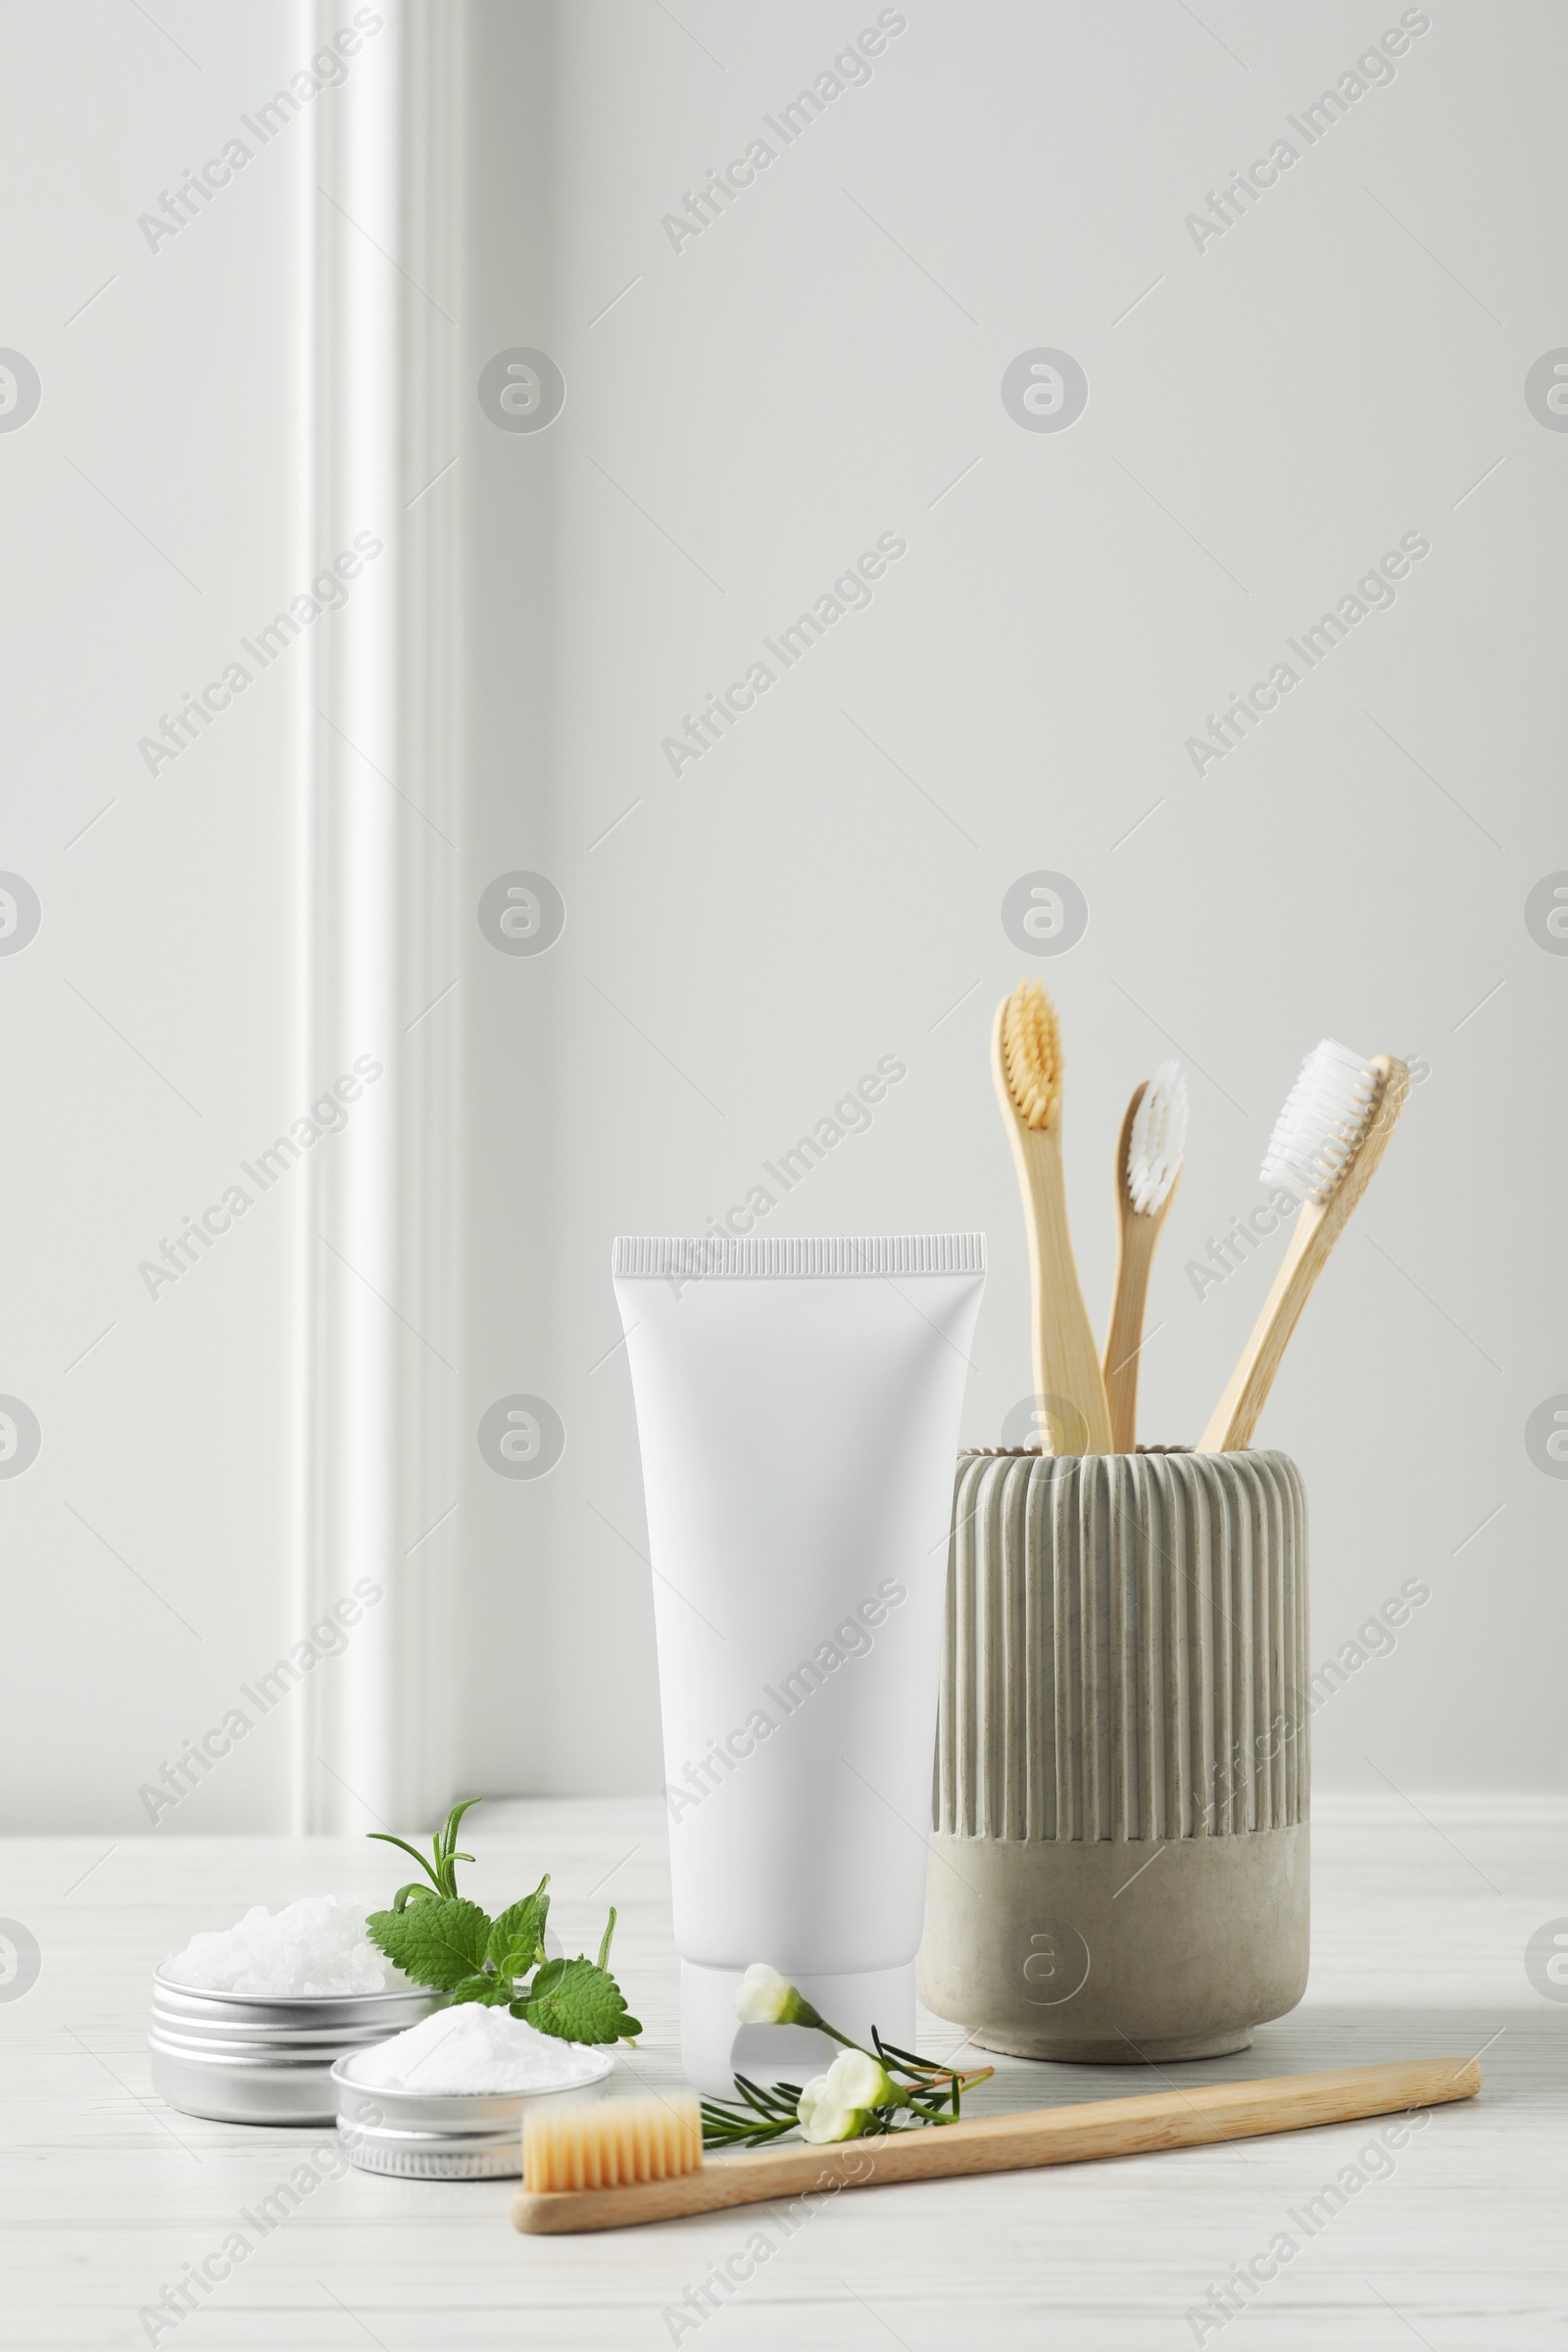 Photo of Toothbrushes, toothpaste and herbs on white wooden table